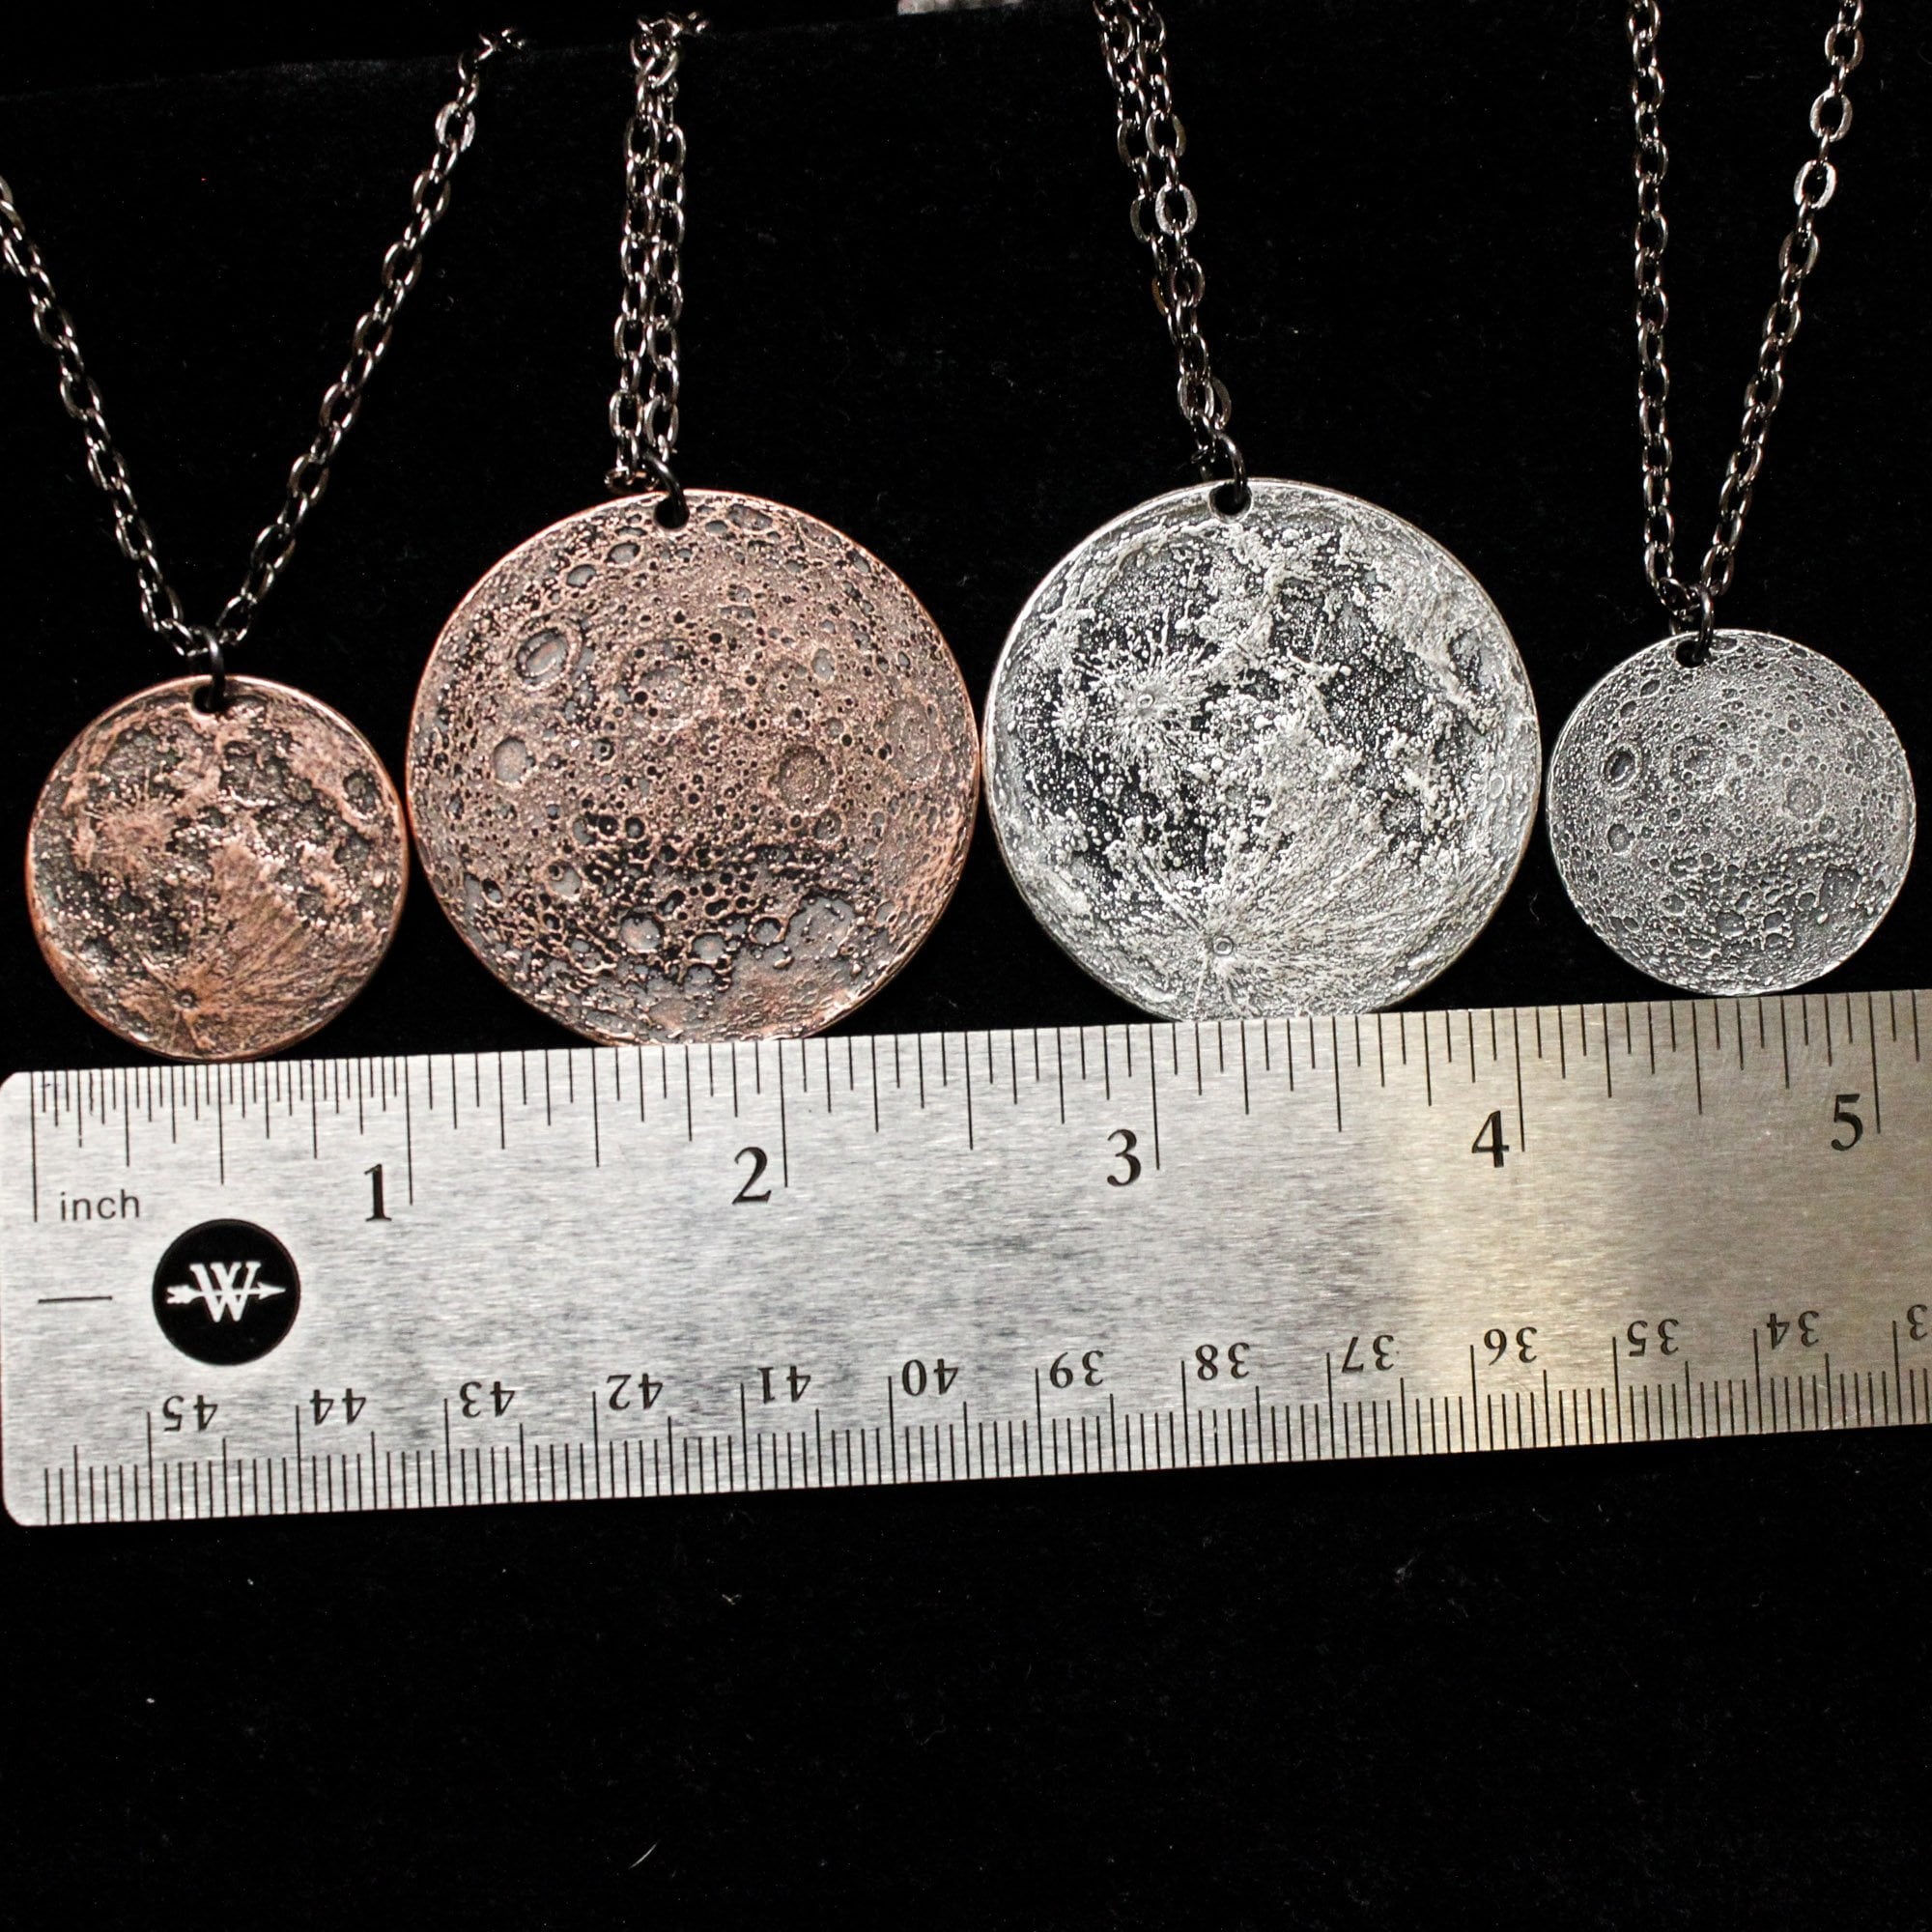 Full Moon Silver Necklace or Charm